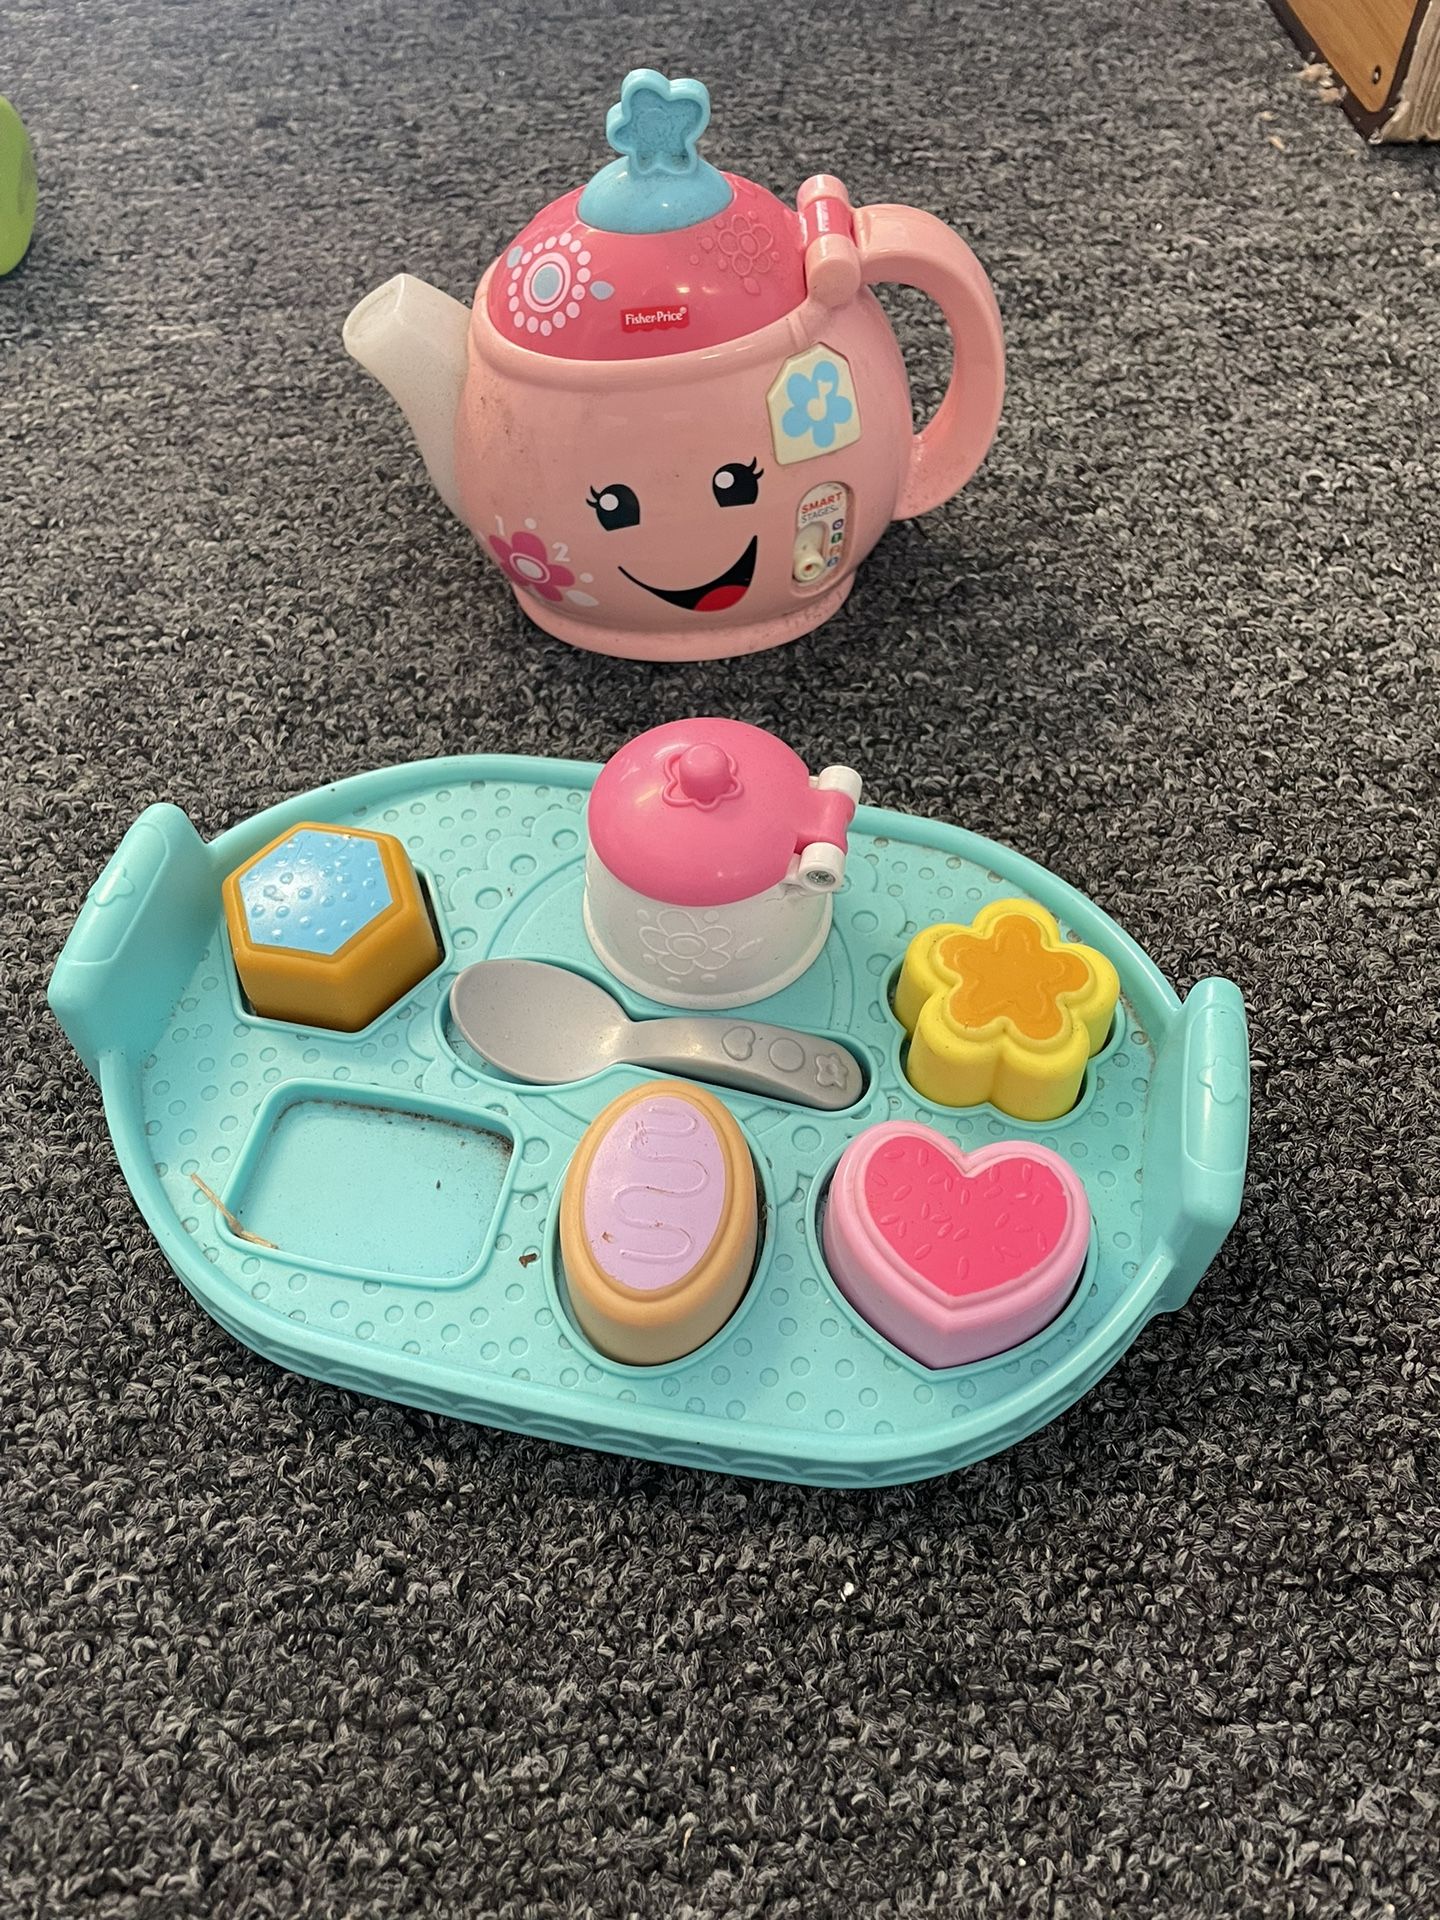 Fisher Price Play Kitchen  Musical Kettle